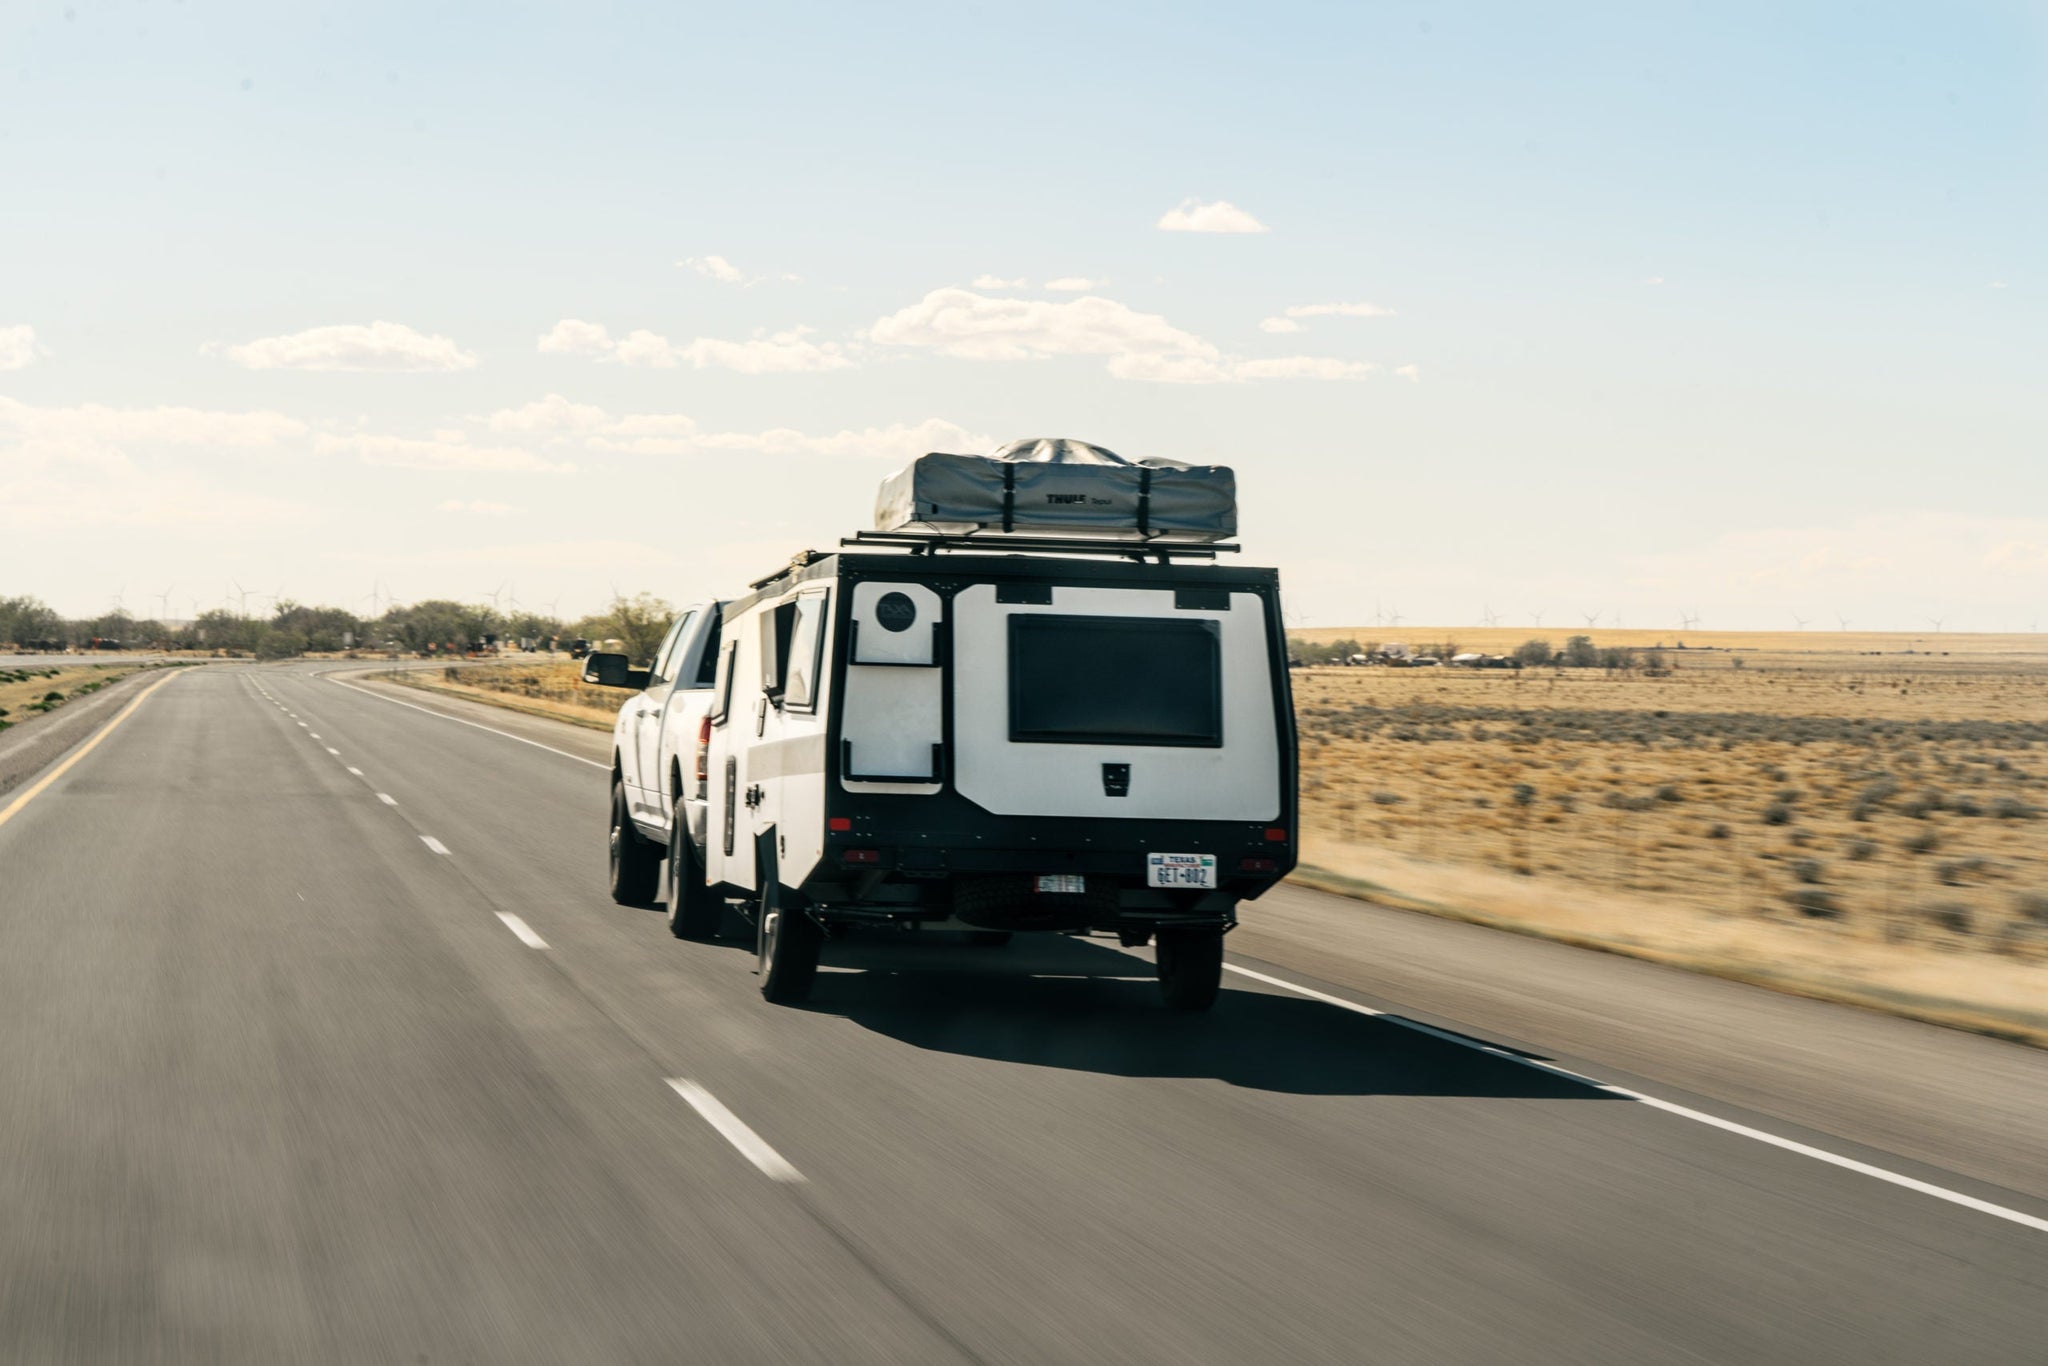 A Checklist For Life on the Road in your Habitat